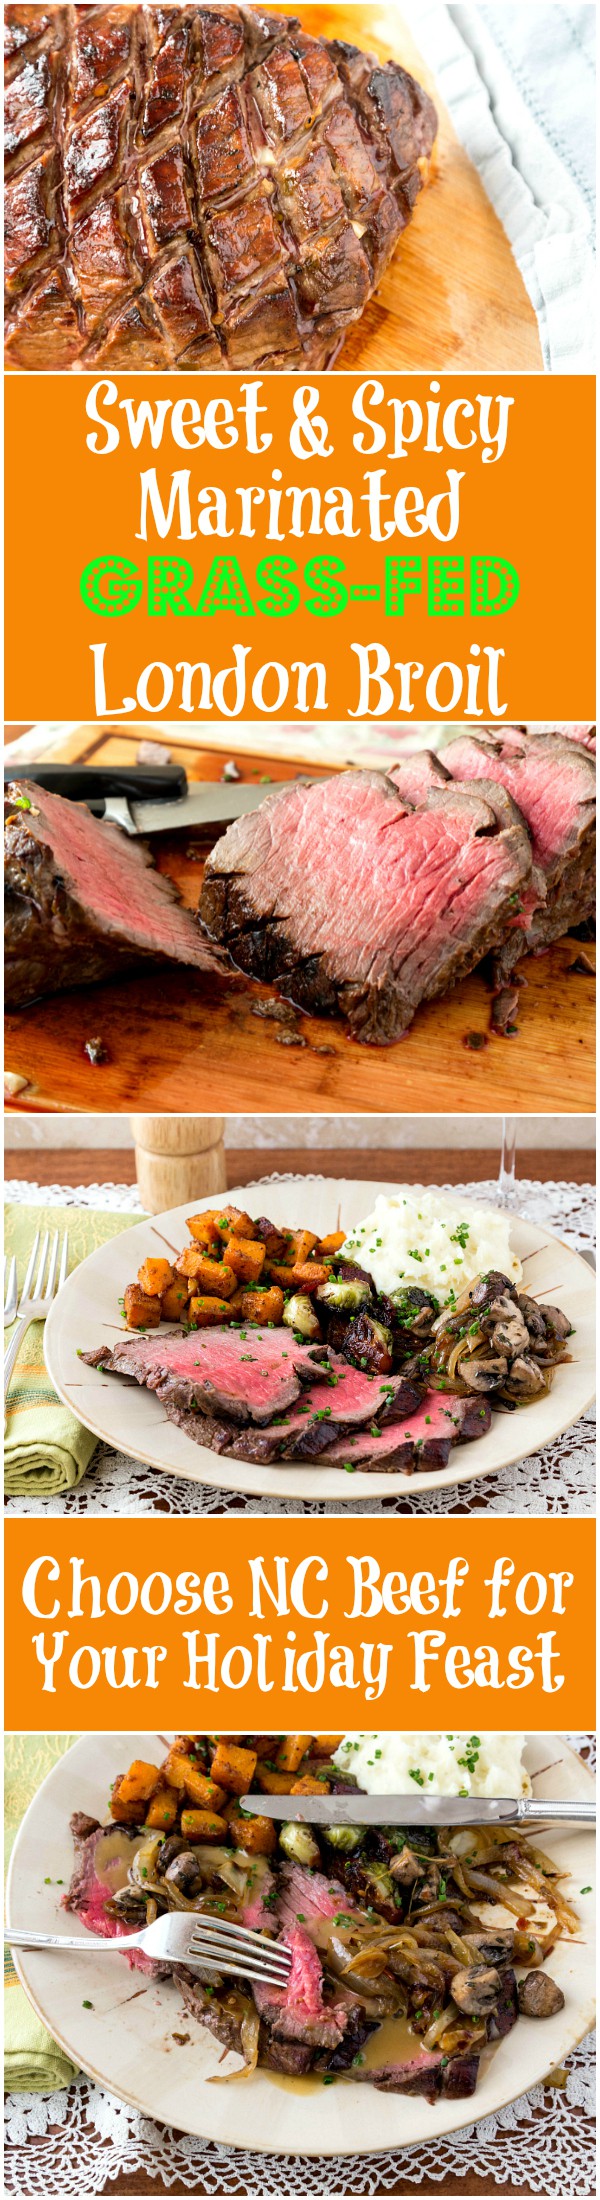 Collage of photos of beef with text reading: "Sweet & Spicy Marinated Grass-fed London Broil" and then "Choose NC Beef for Your Holiday Feast".